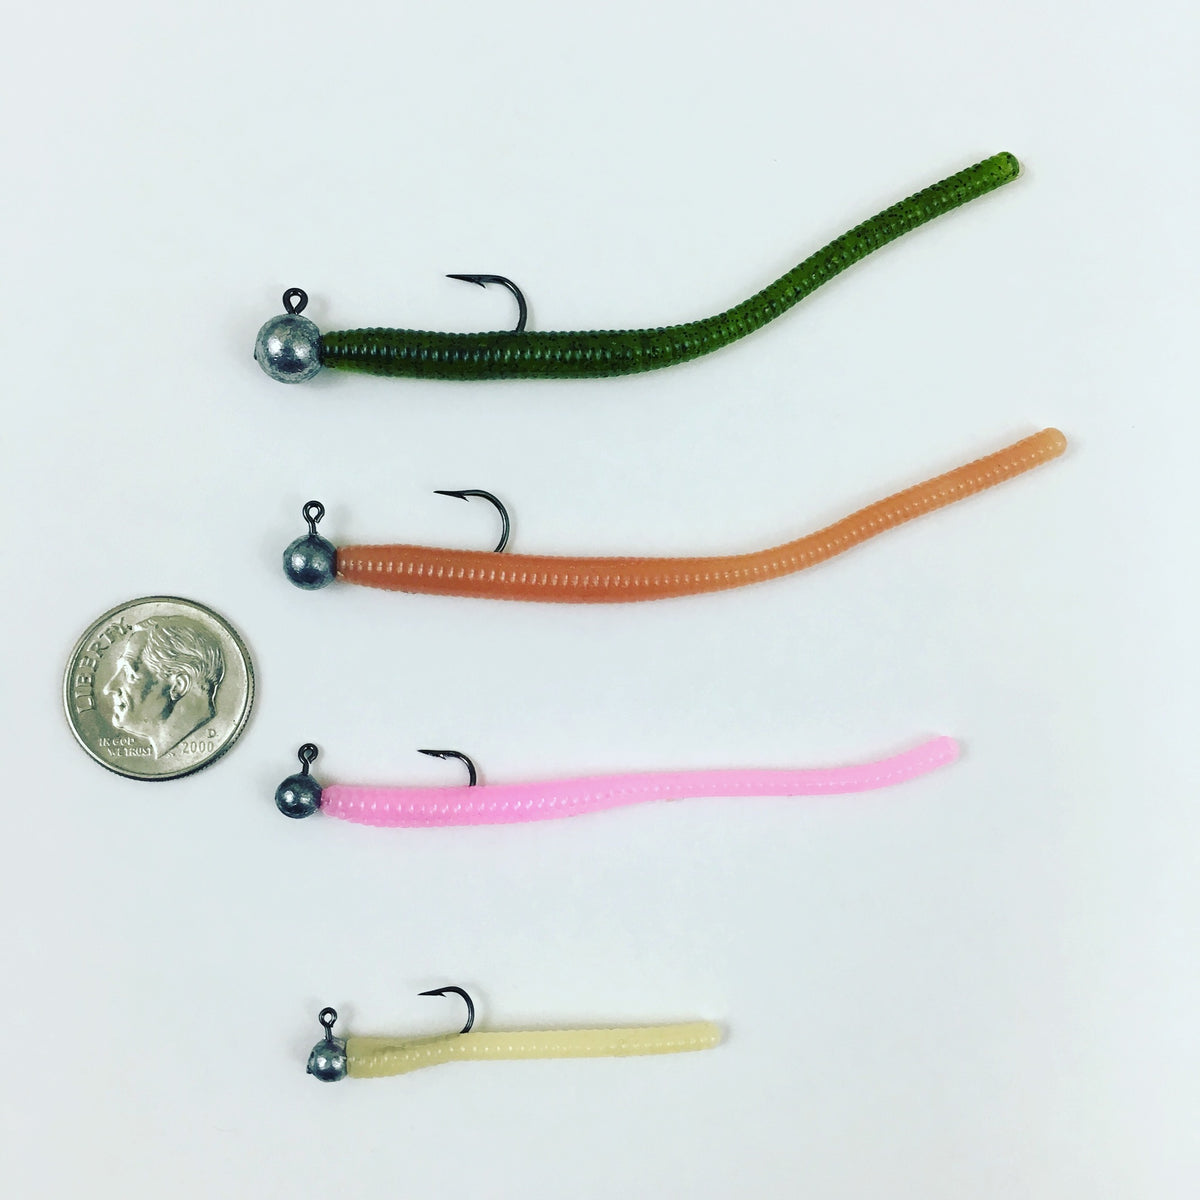 Ruffy Trout Worm,Trout Worm,UV Worm, 4,99 €